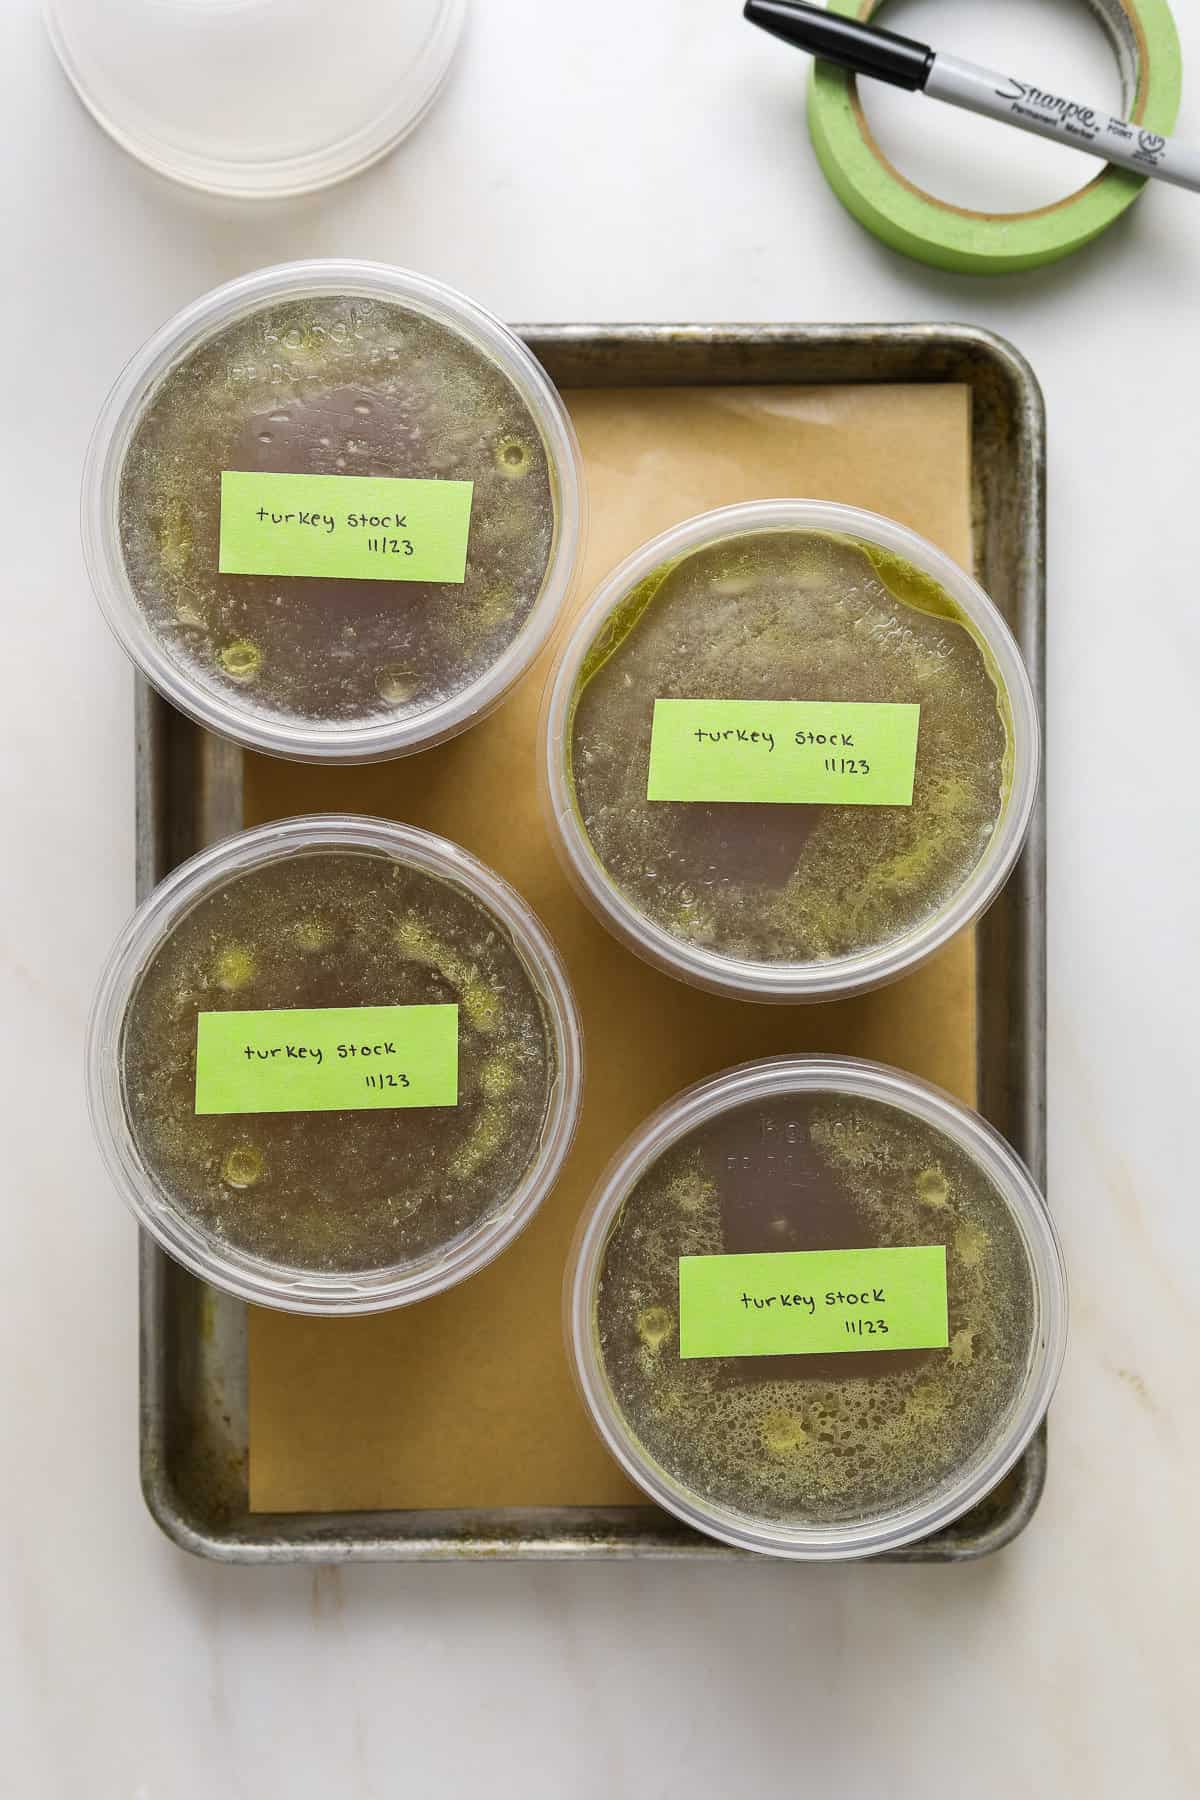 Plastic quart containers of turkey stock, labeled with green tape.